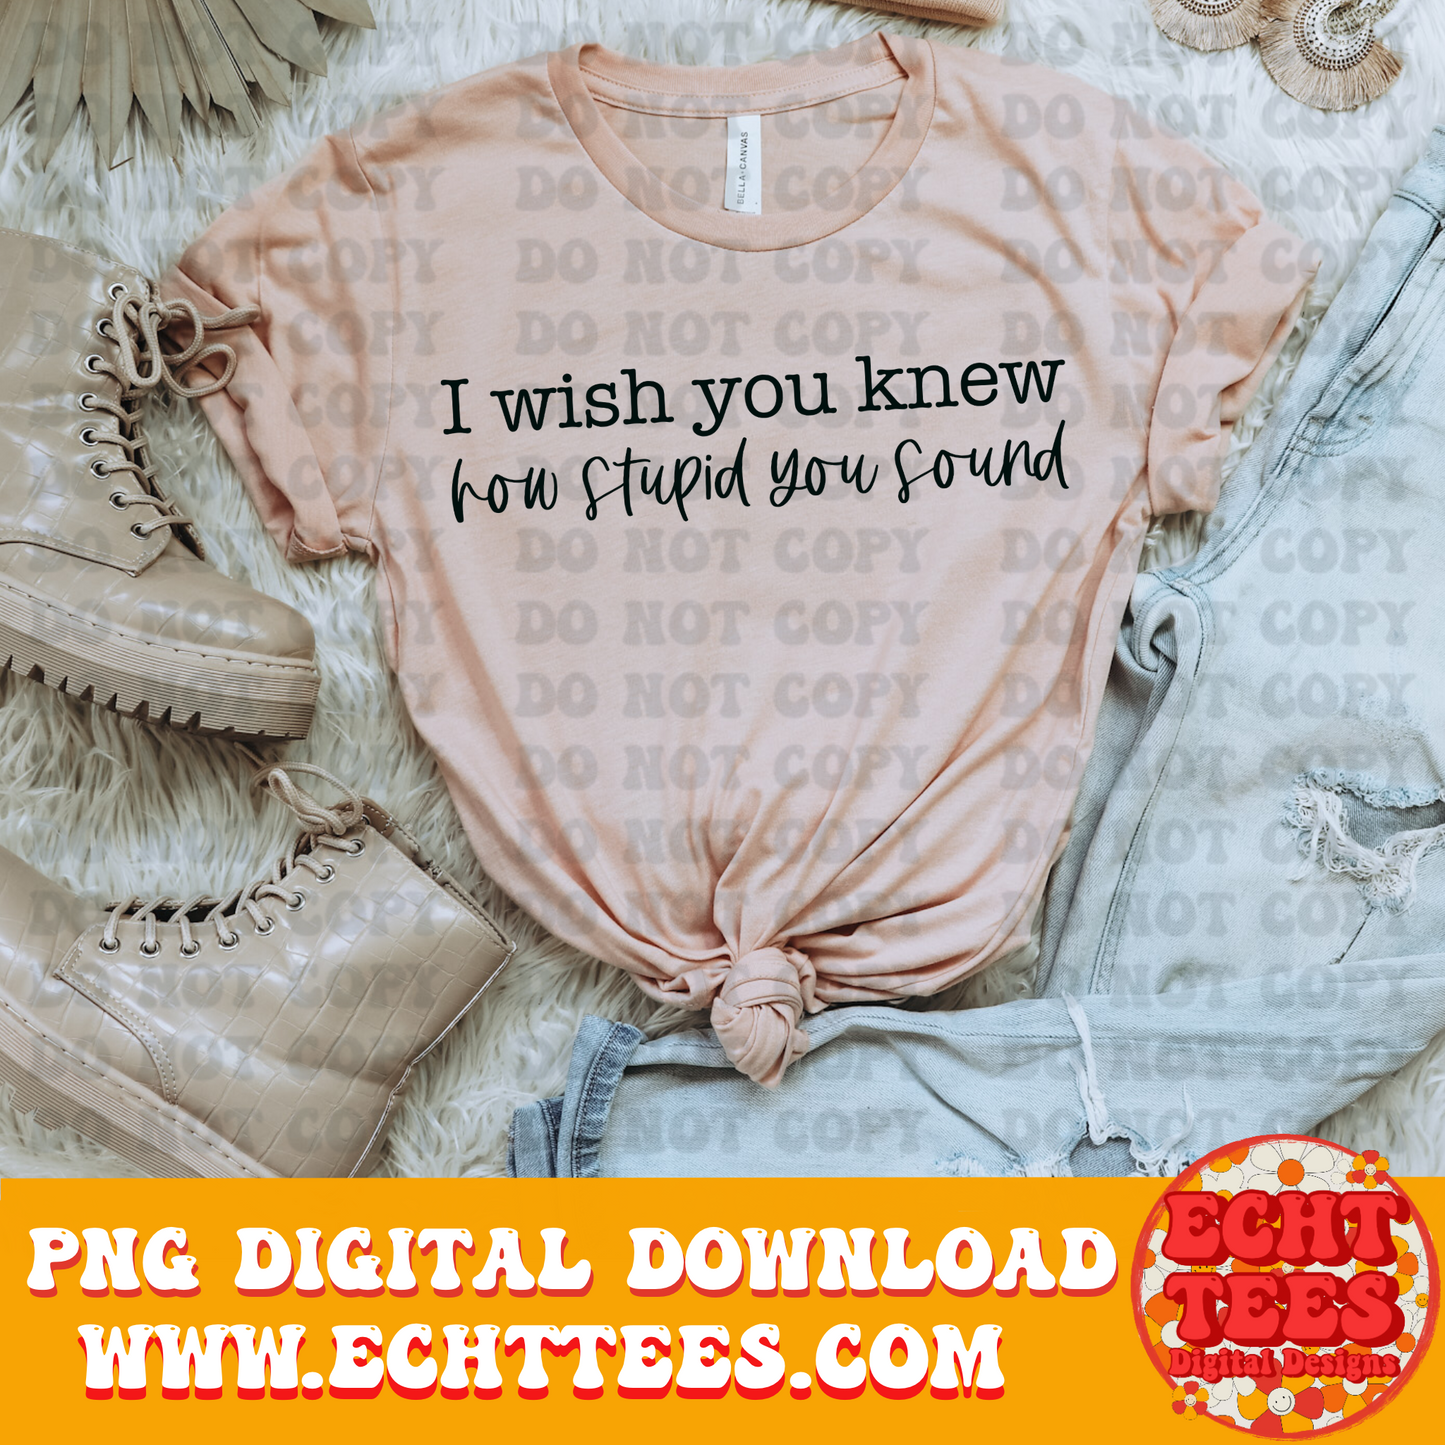 I wish you knew how stupid you sound PNG Digital Download